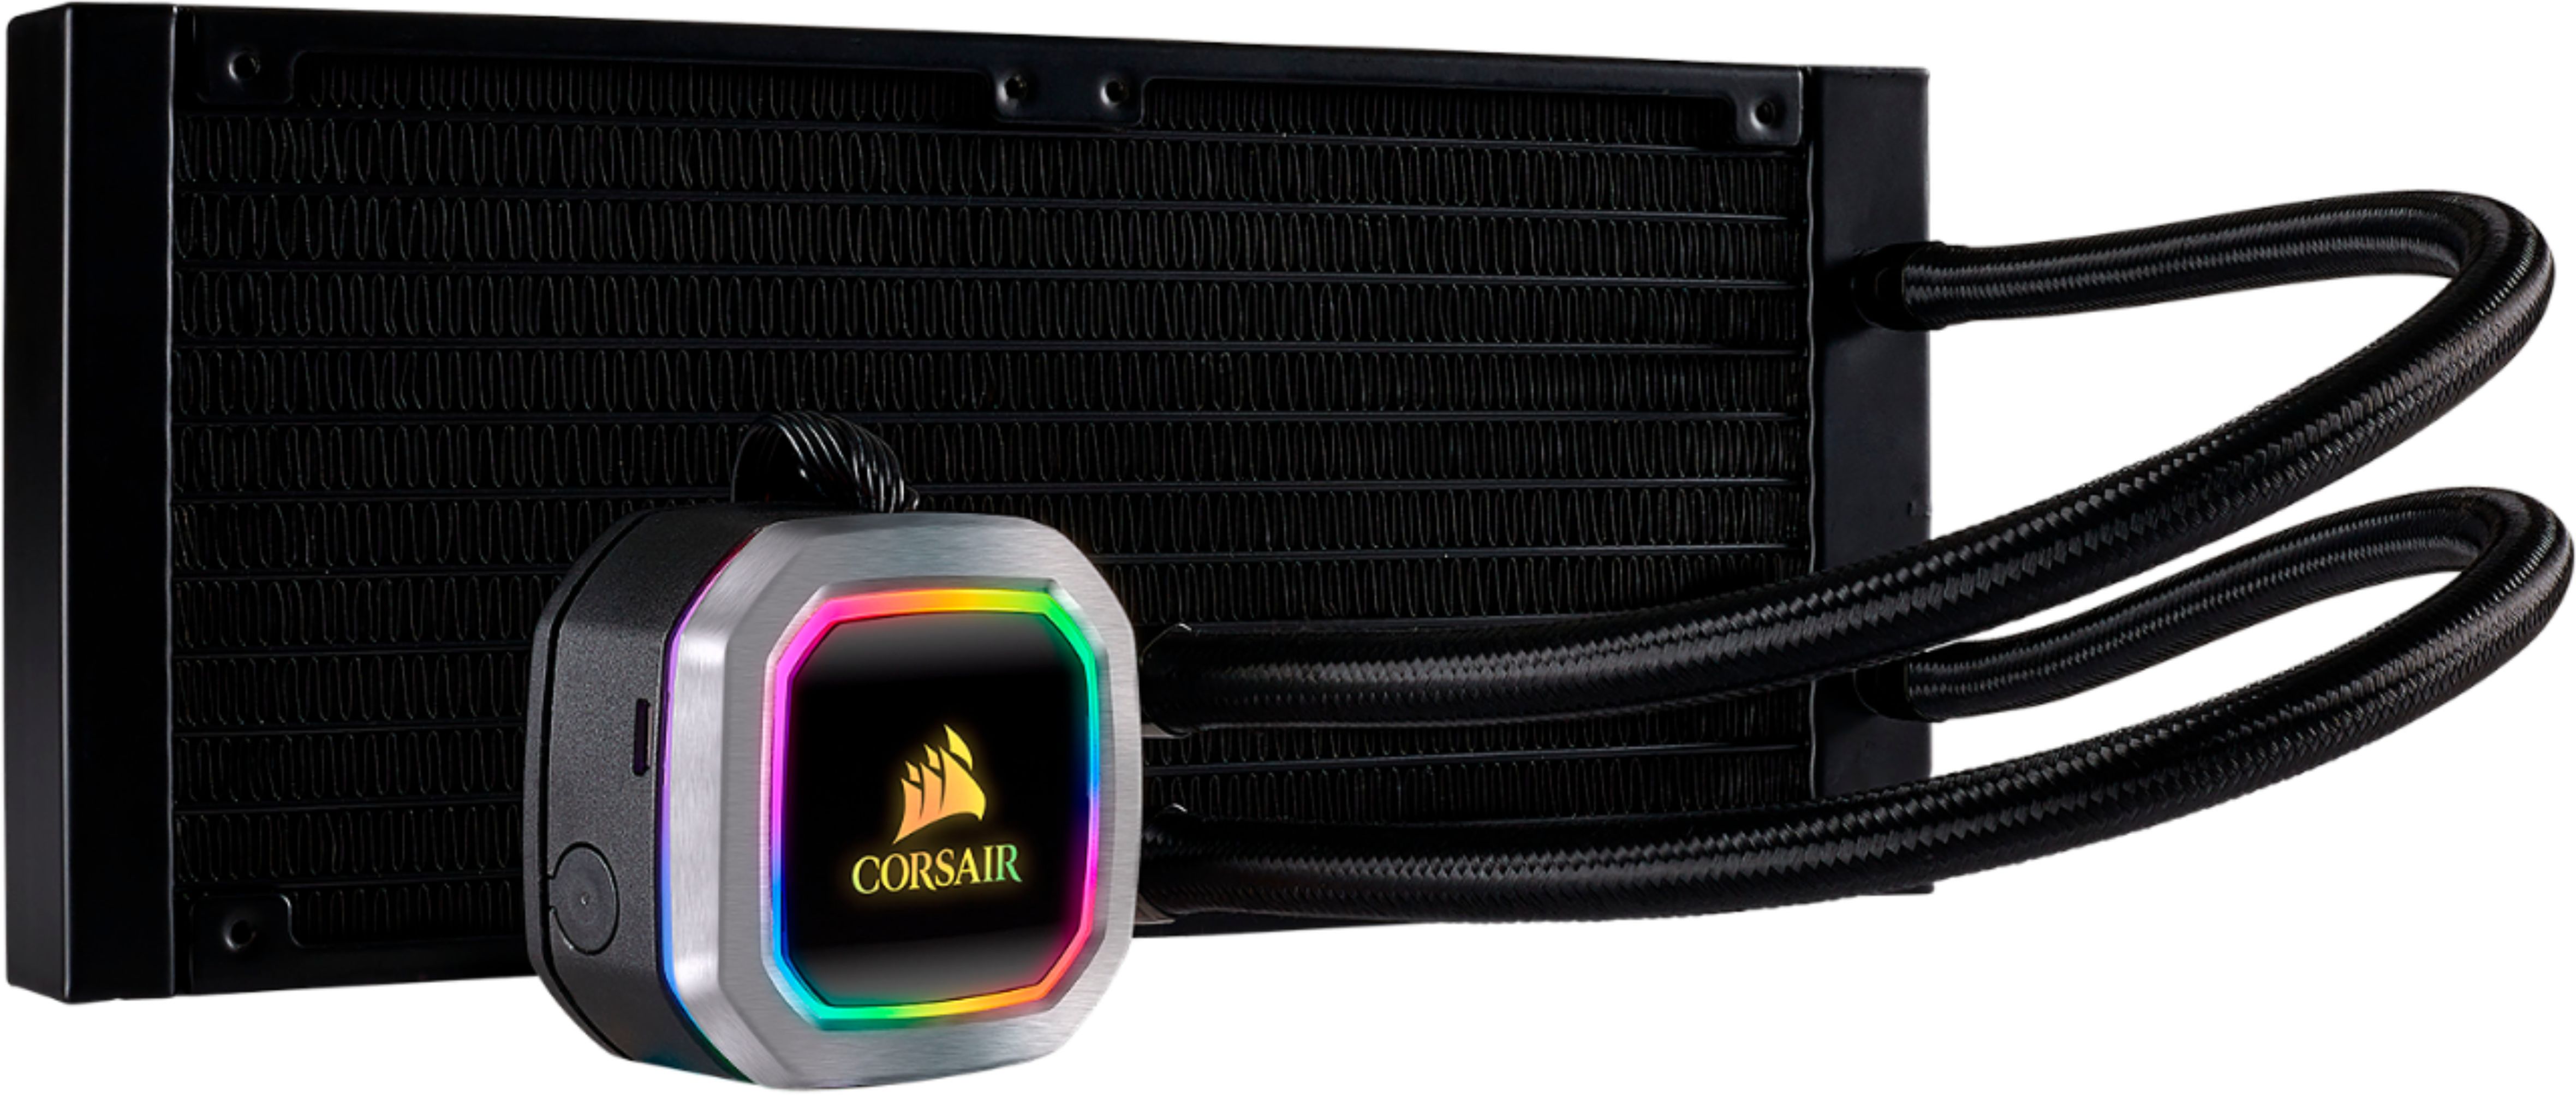 Best Buy: CORSAIR Hydro Series H100i Platinum 120mm Processor Cooling System with RGB Black/Silver CW-9060039-WW